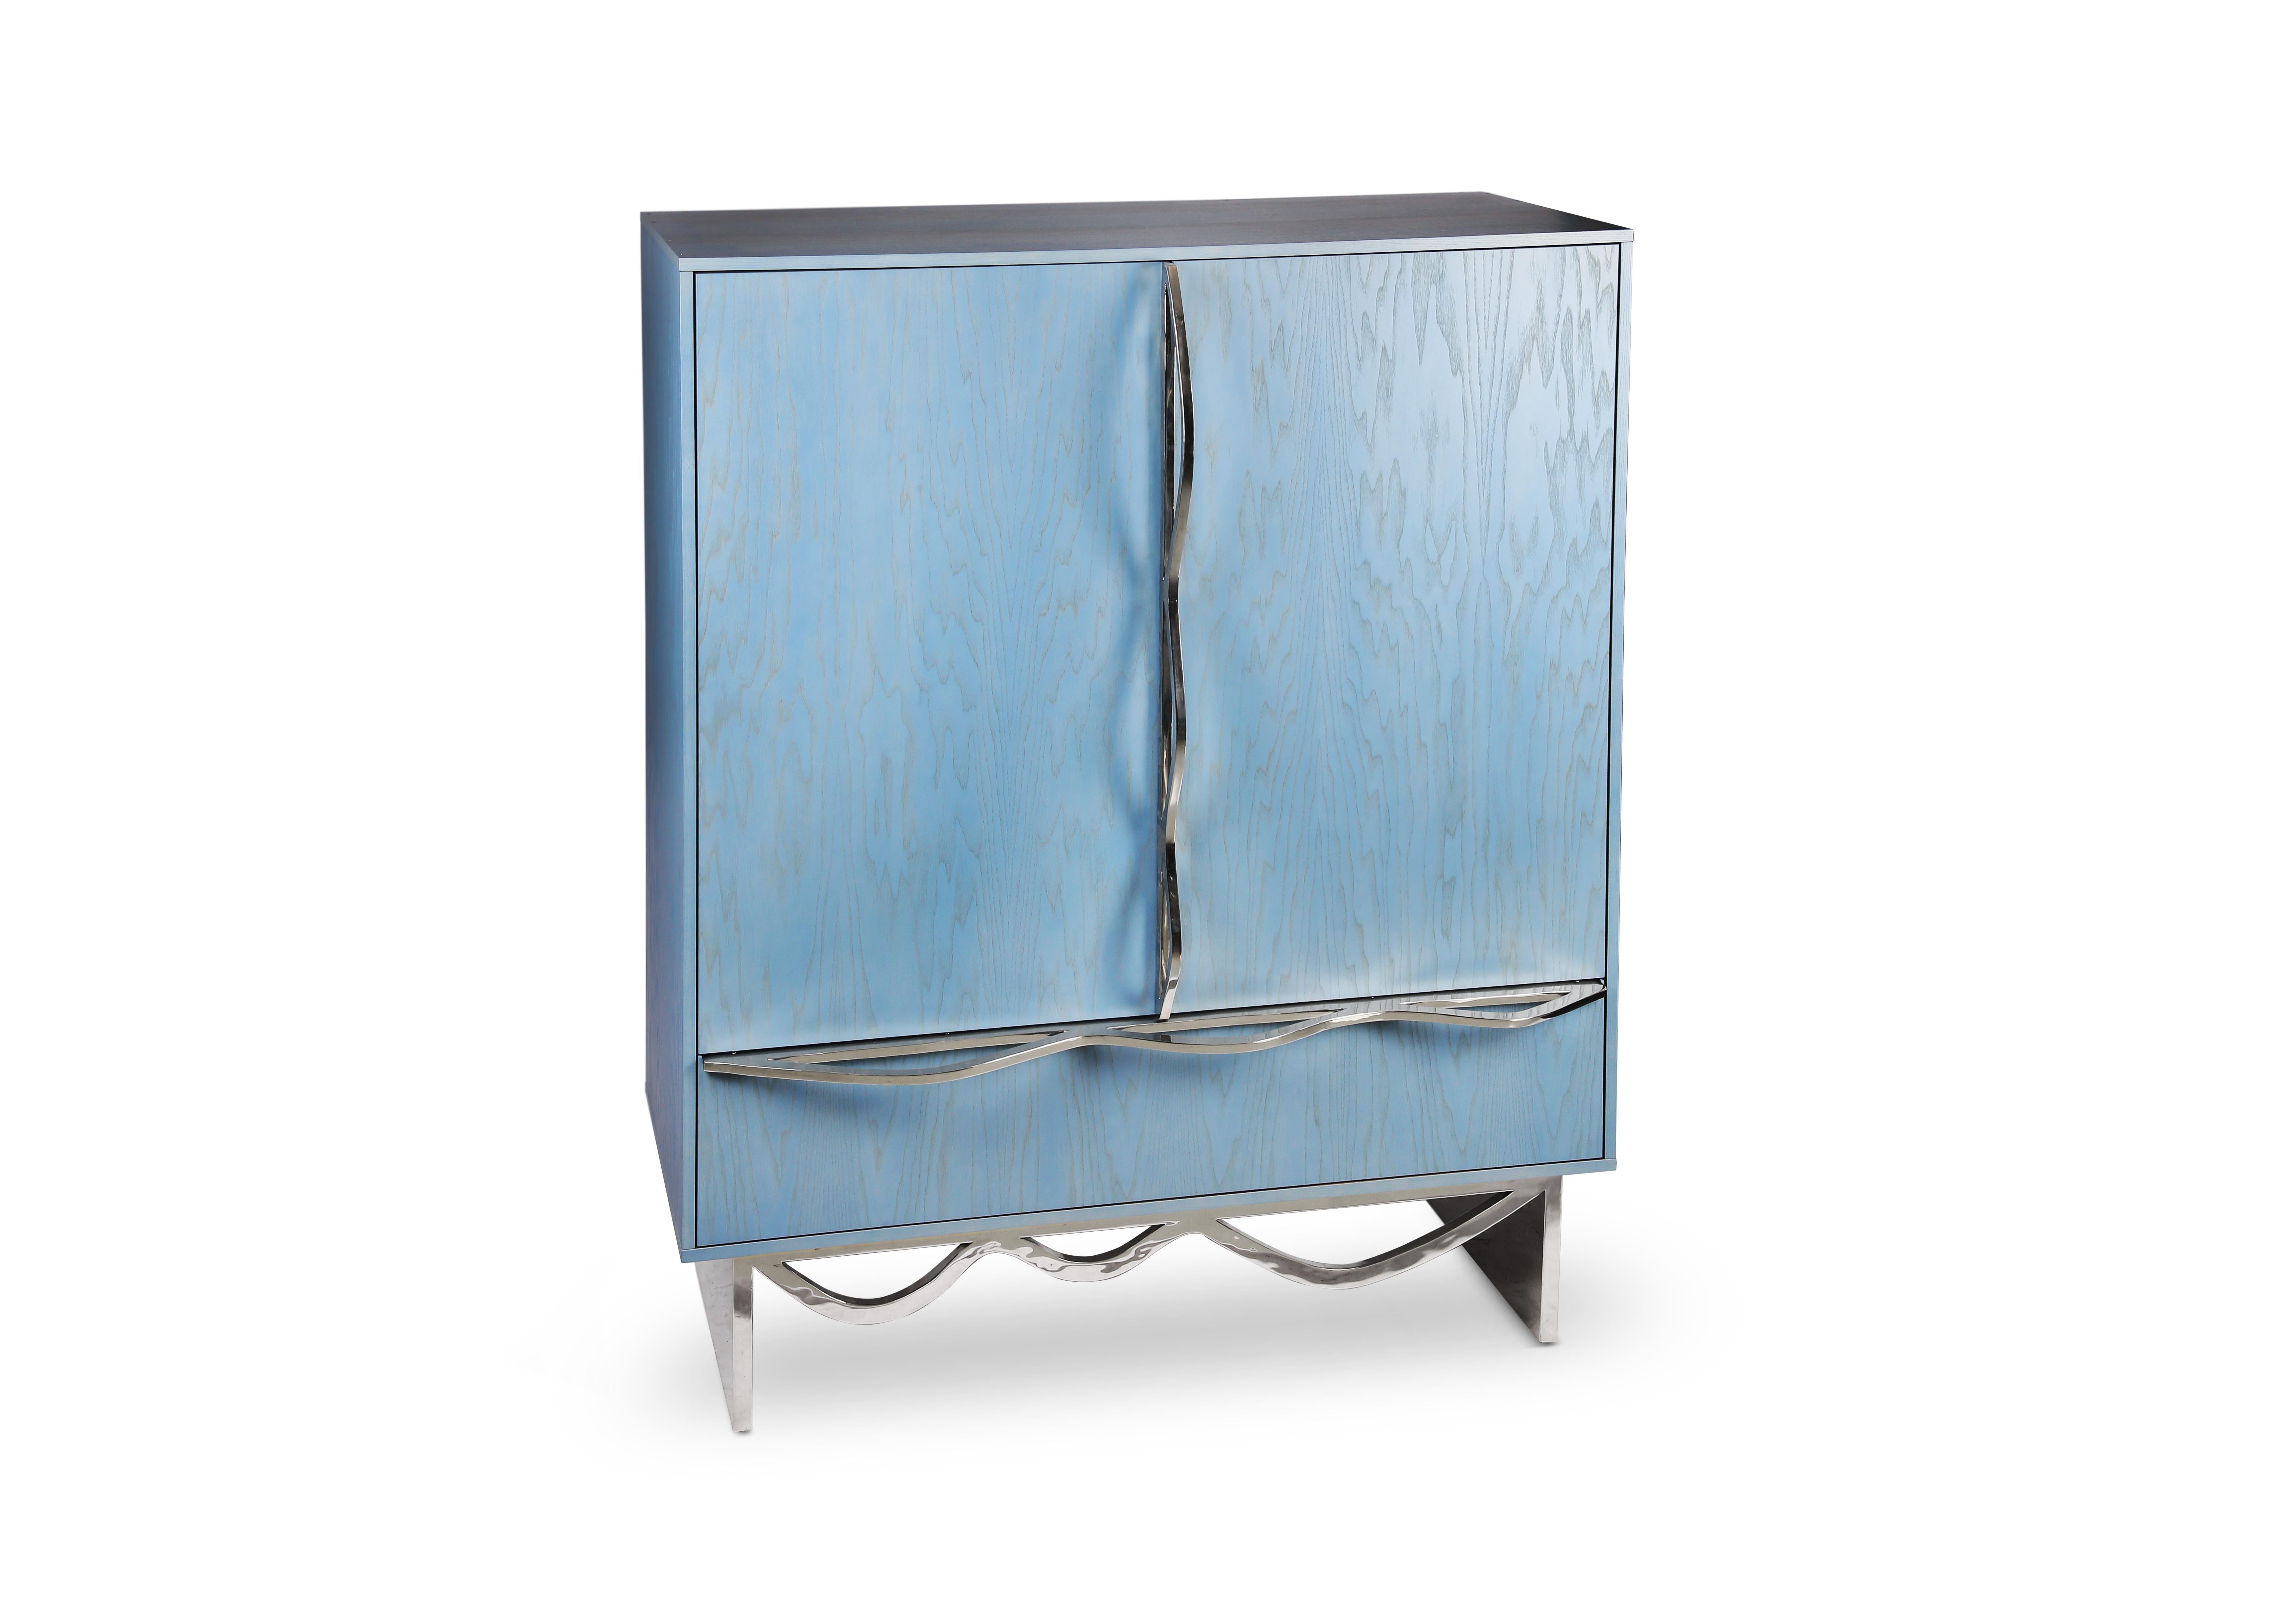 This media cabinet is the perfect addition to any living room, giving it a touch of mid-century modern style. Constructed from premium ash and American walnut veneers, this cabinet boasts a sleek and durable design. The exterior of the cabinet is